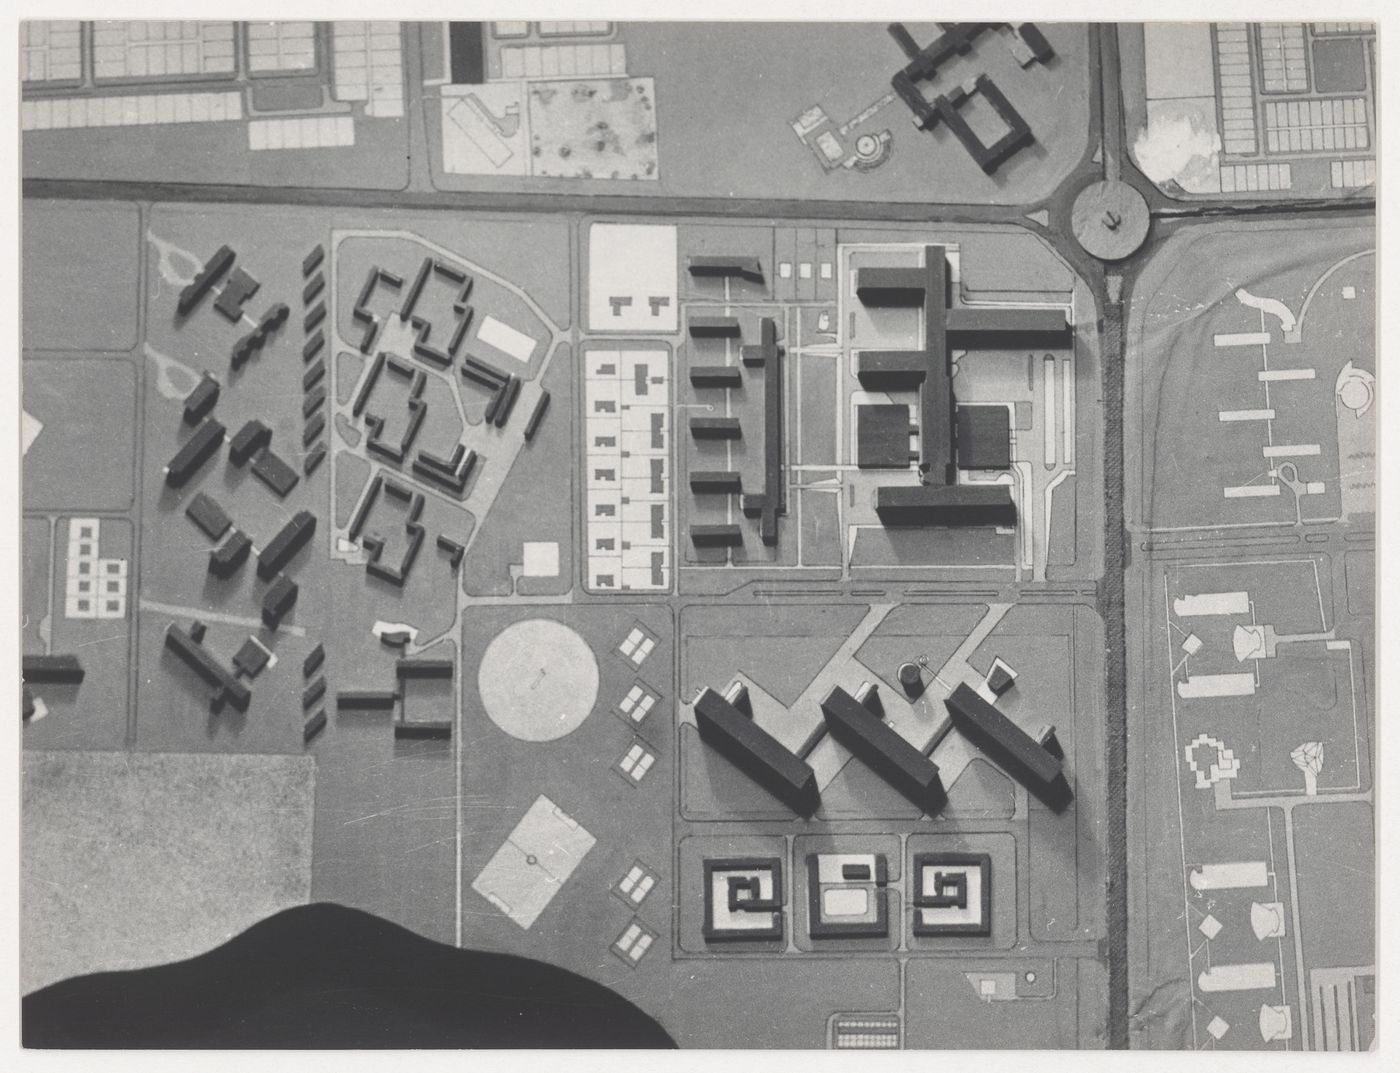 View of the site plan's model for Post Graduate Institute for Medical Research, Sector 12, Chandigarh, India